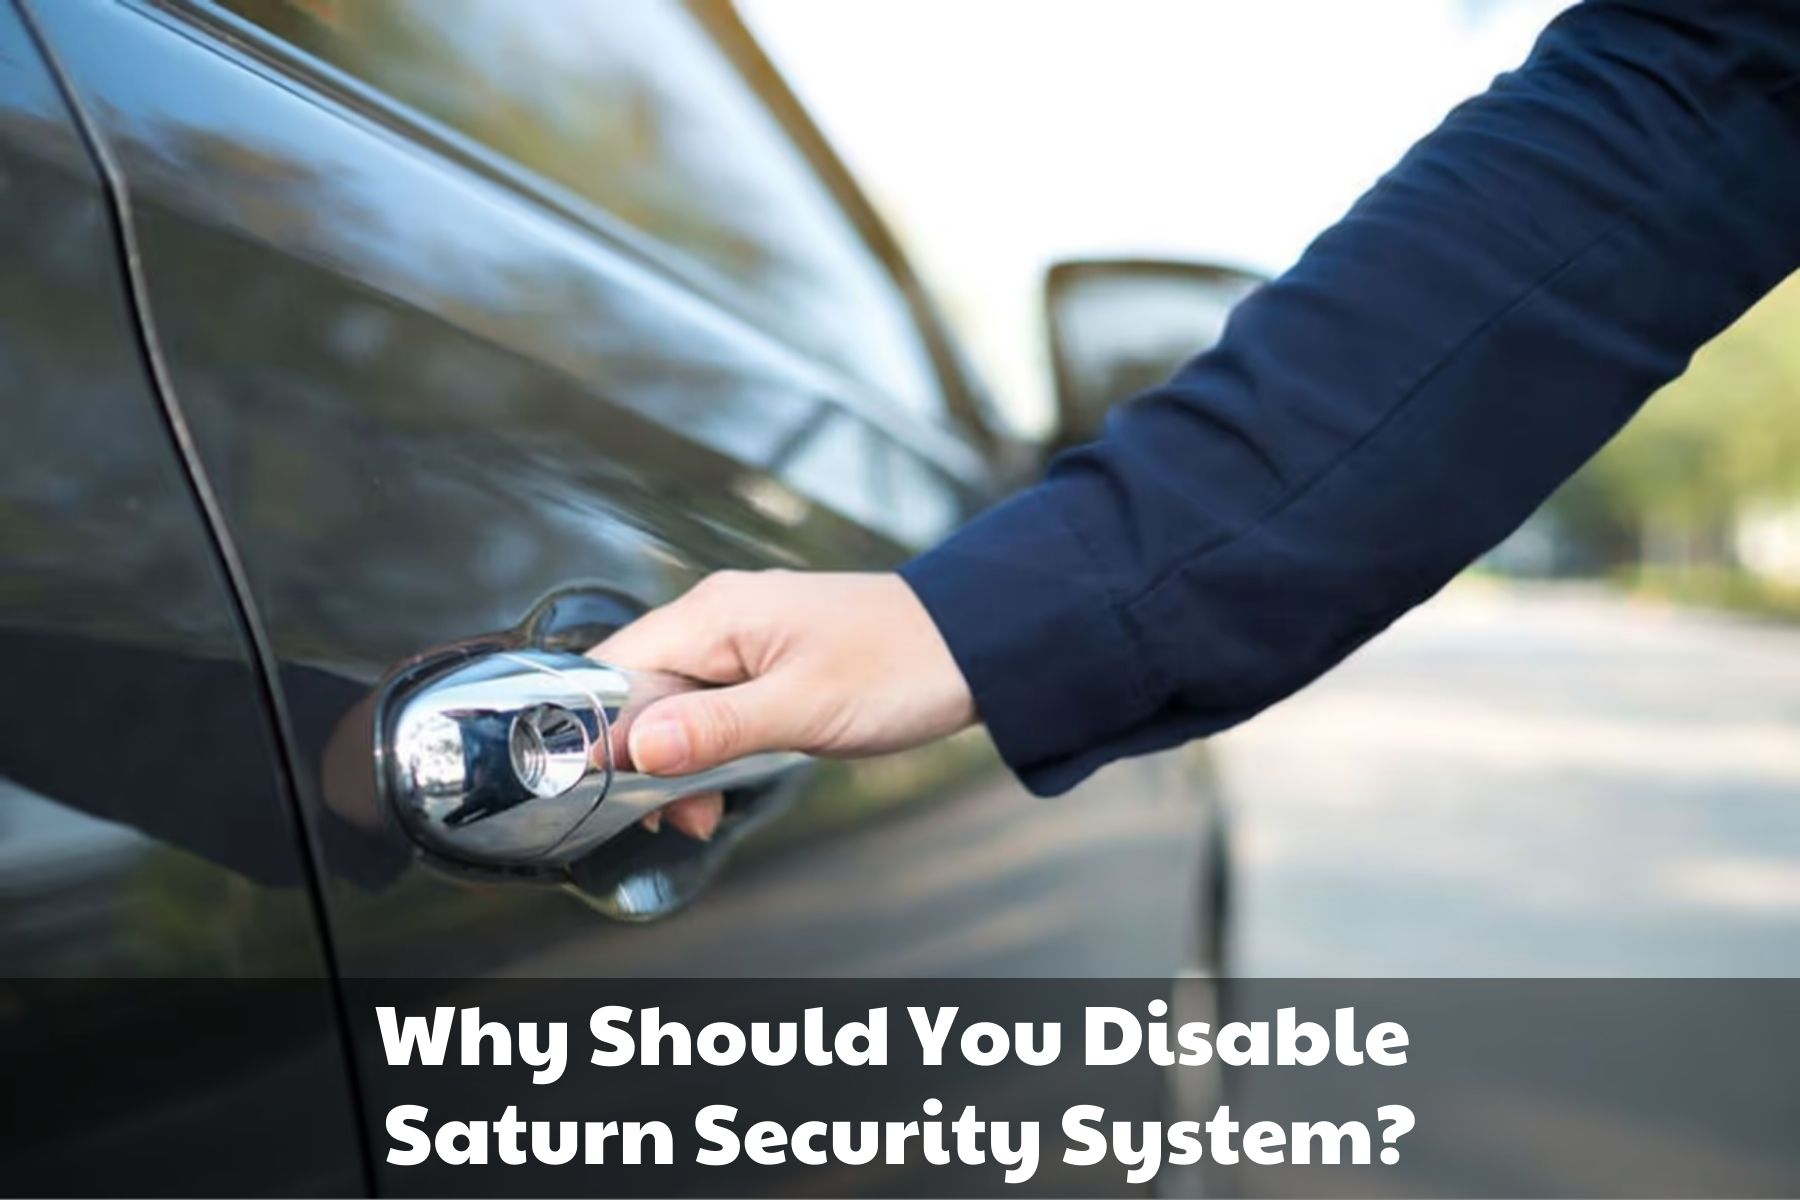 How to Disable Saturn Security System (1)